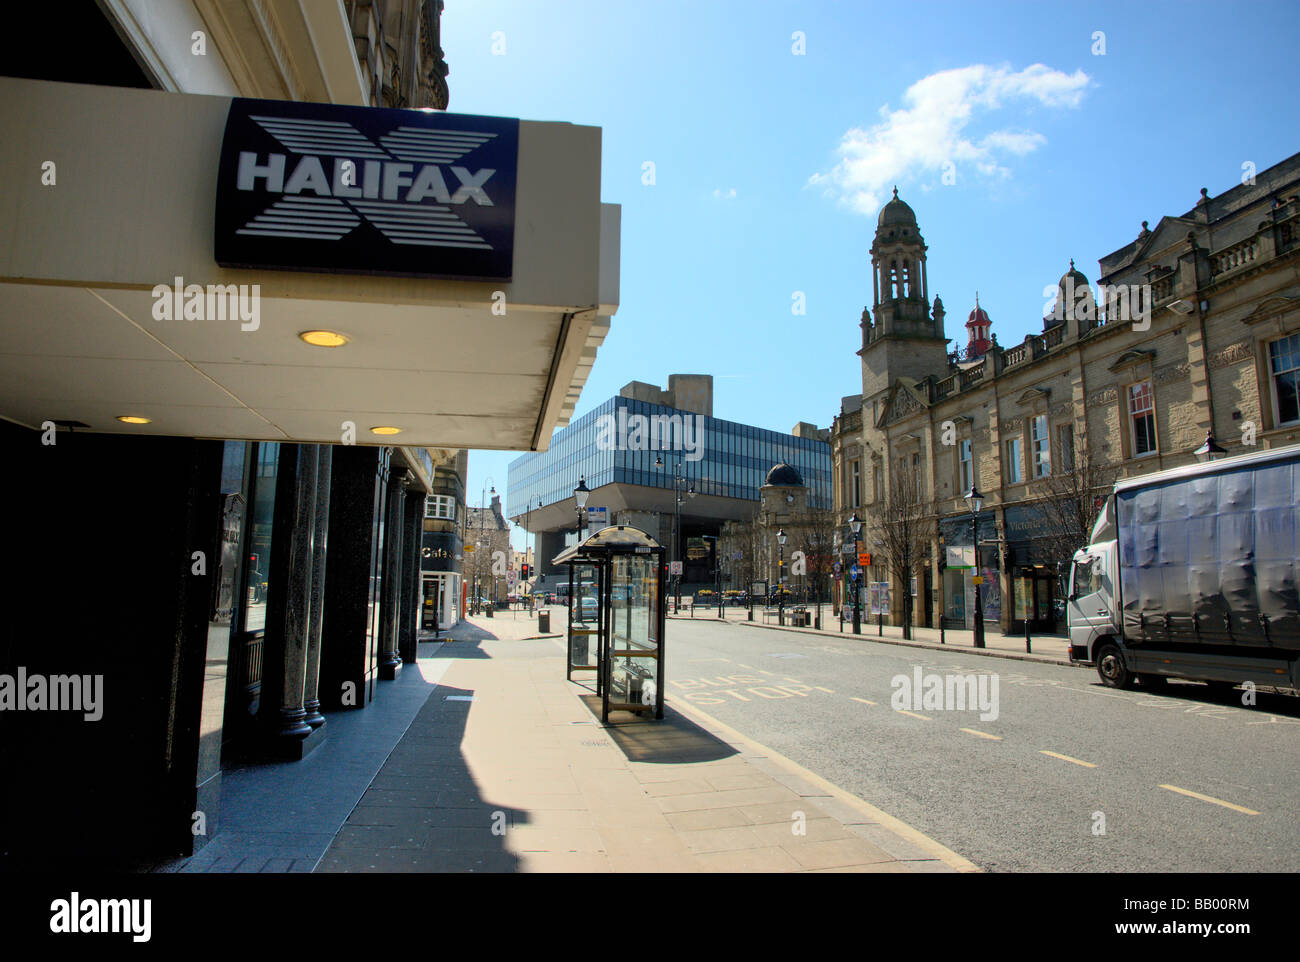 Halifax Branch of HBOS with head office in background Stock Photo